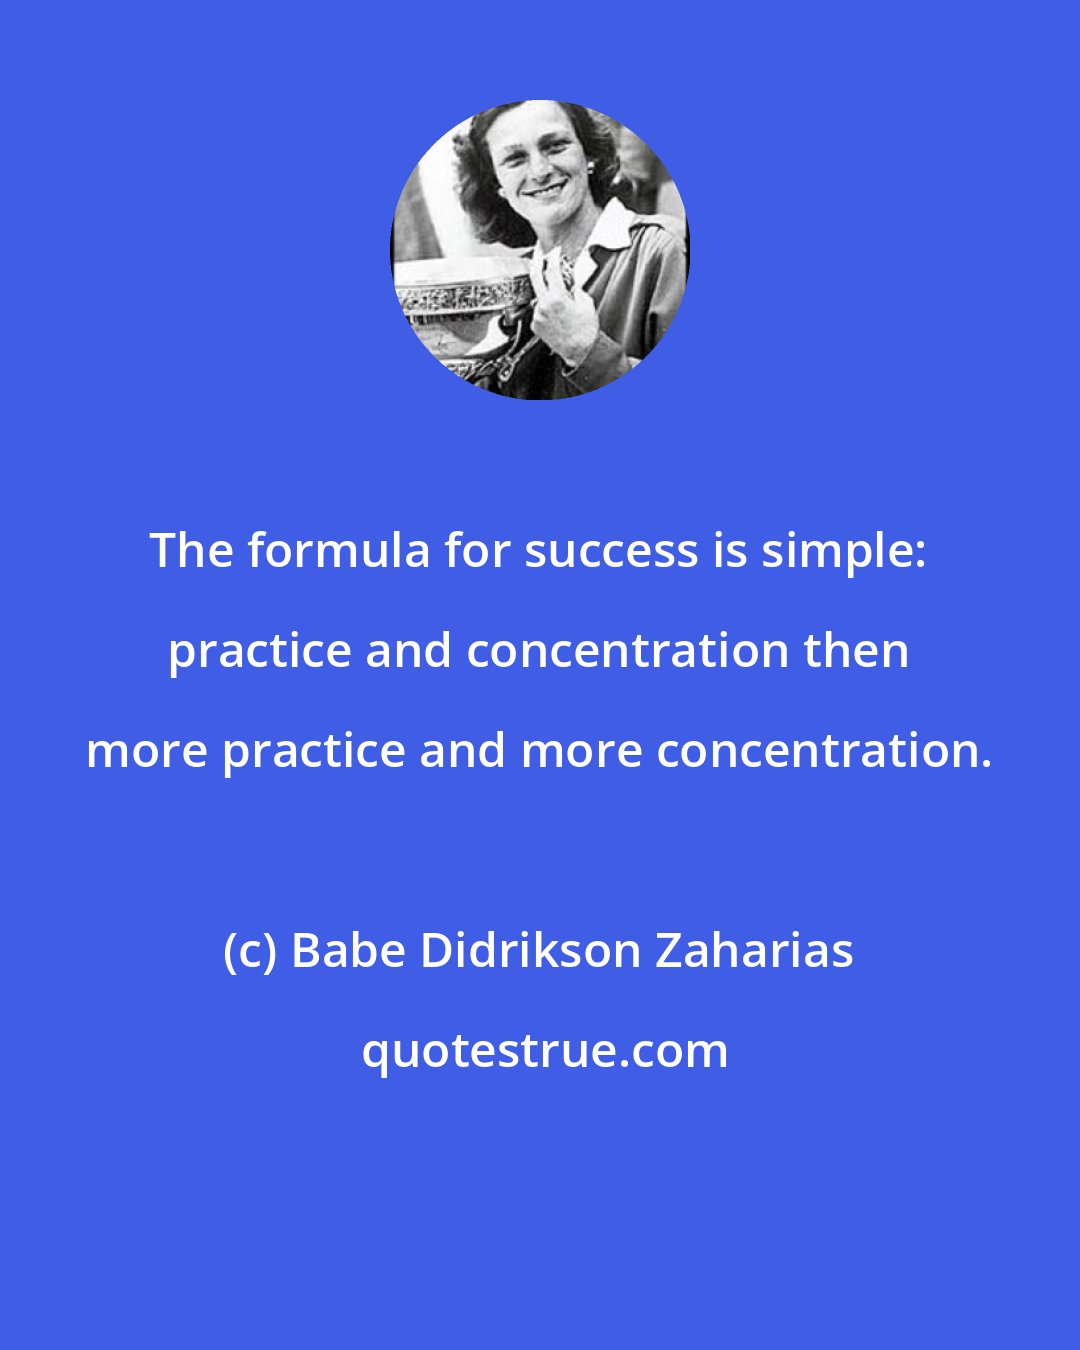 Babe Didrikson Zaharias: The formula for success is simple: practice and concentration then more practice and more concentration.